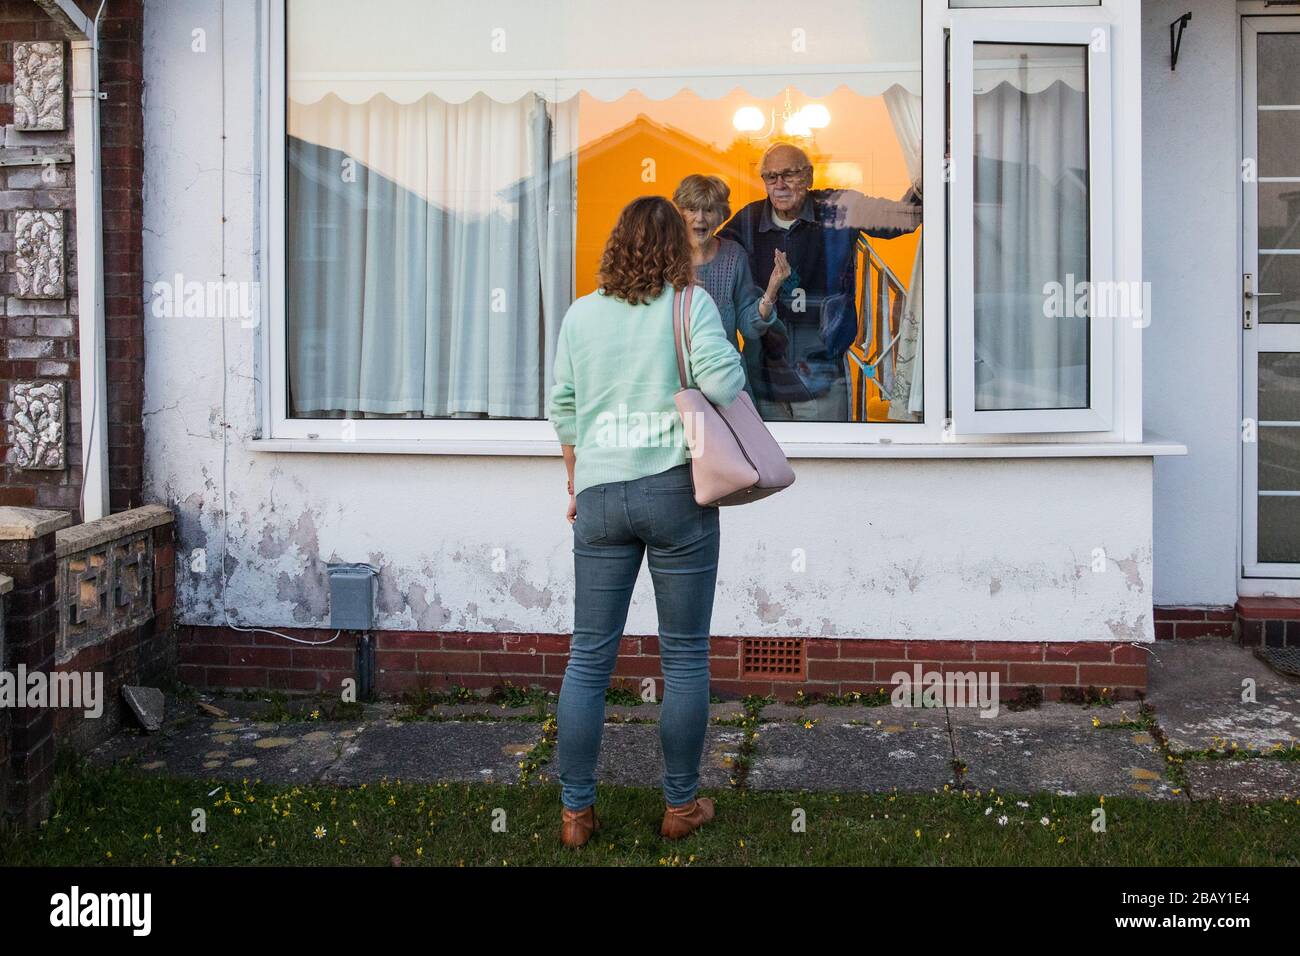 Author, Tracy Rees visits her vulnerable elderly parents to deliver groceries during the isolation period due to the COVID-19 coronavirus pandemic.The British government has advice all its residents to stay home and only to go outside for food or health reasons. The United Kingdom has reported over 19,500 cases of the Coronavirus and caused over 1000 deaths. Stock Photo